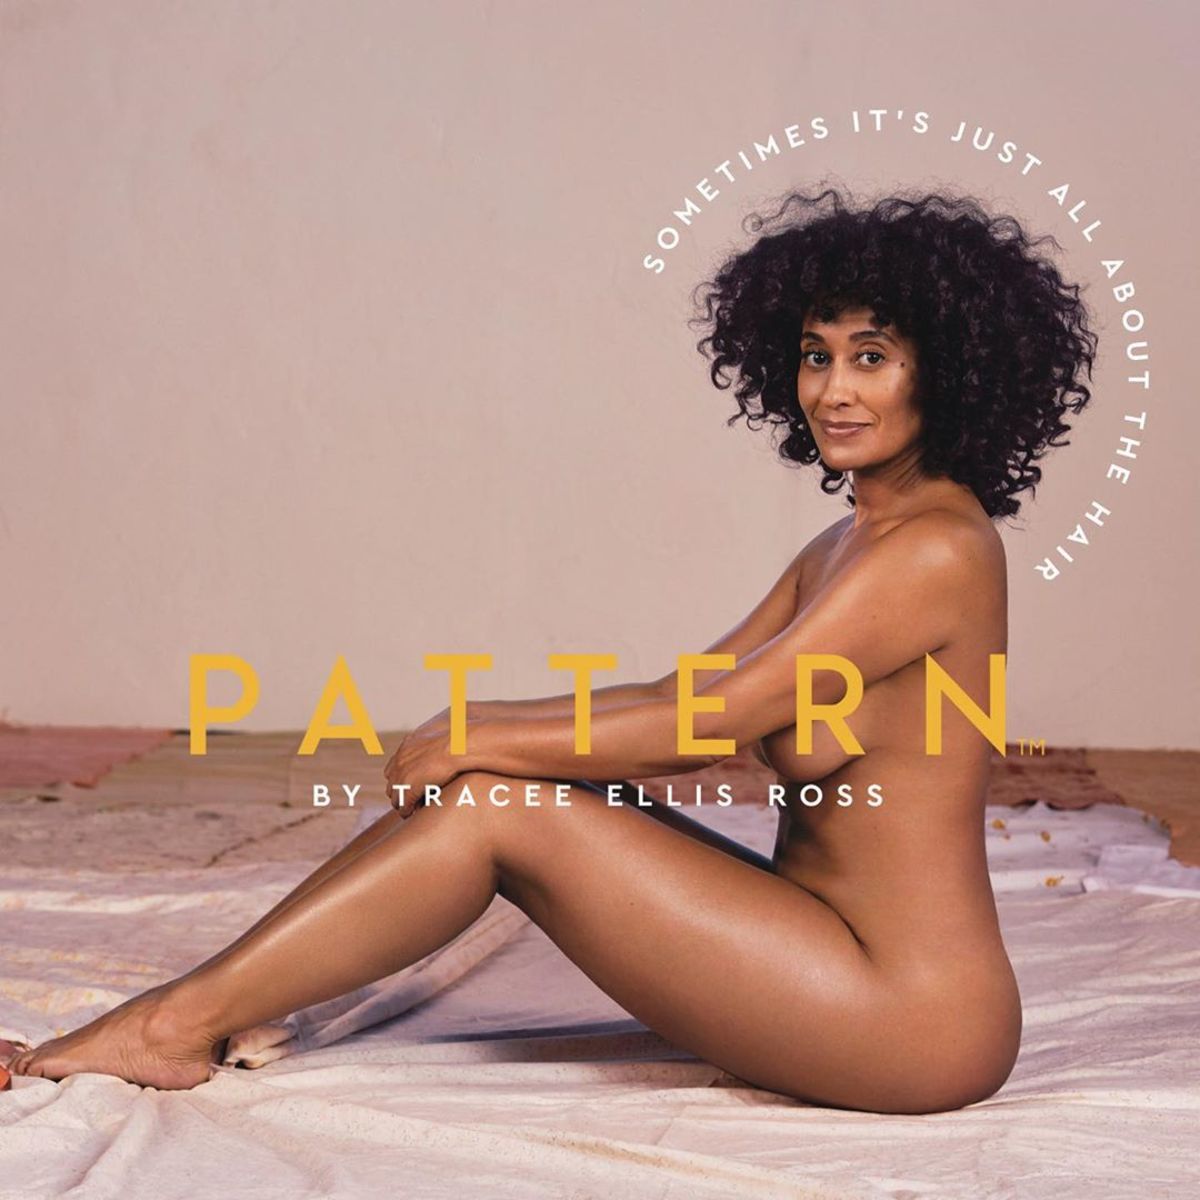 Tracee Ellis Ross for Pattern. Photo: Courtesy of Pattern